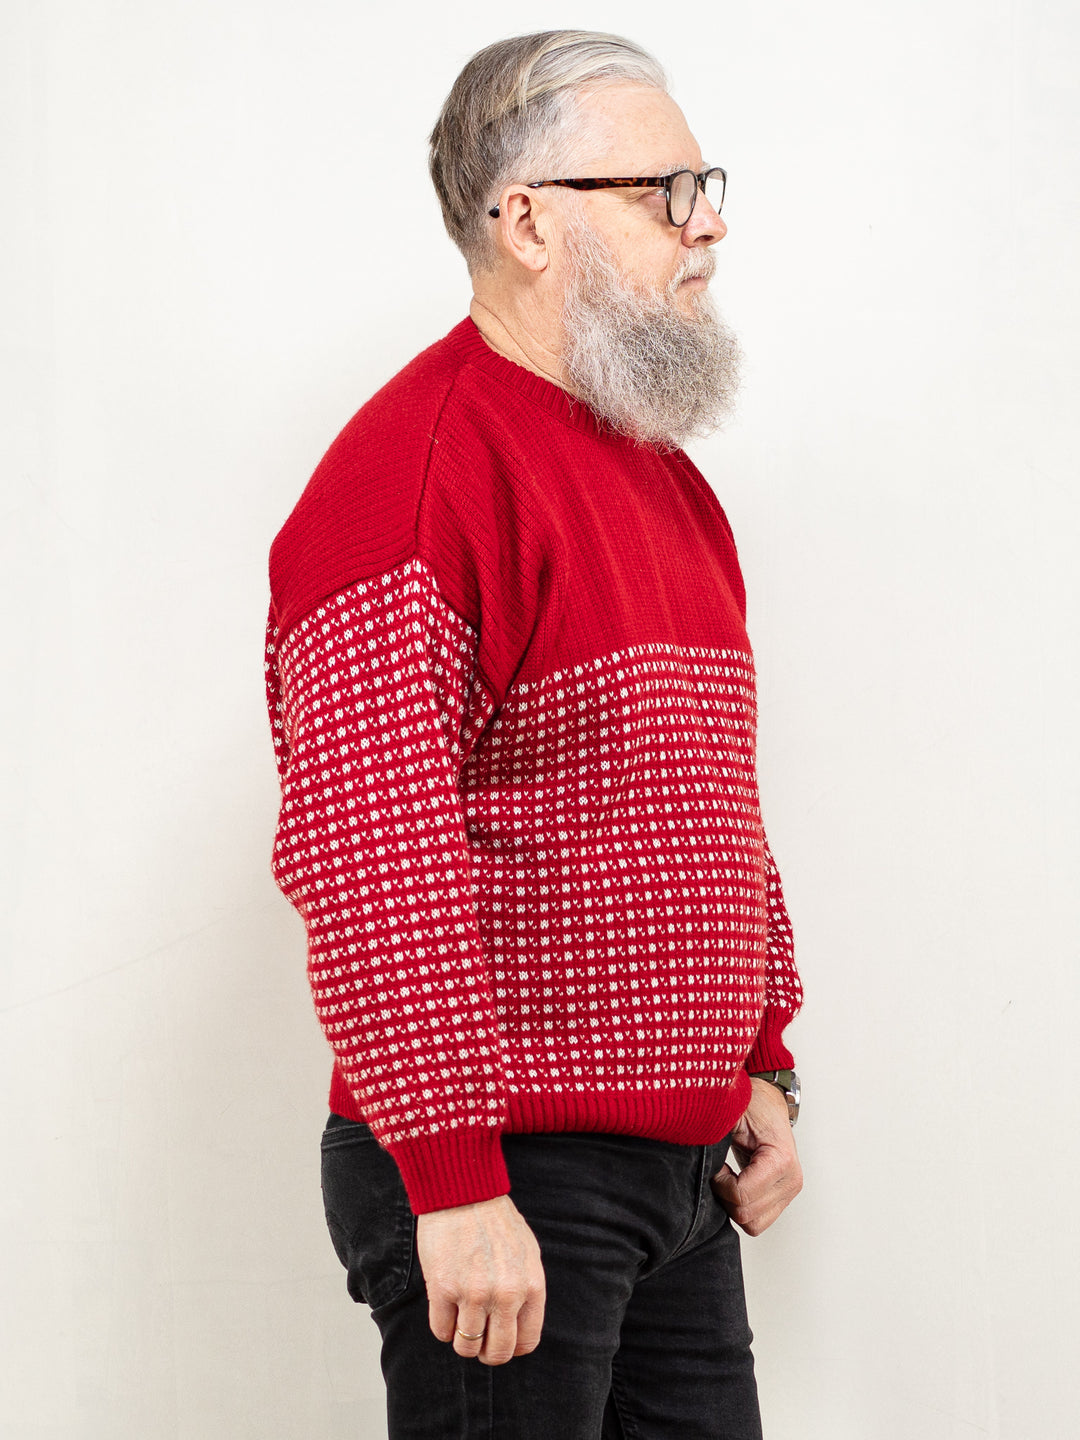 Vintage Mens Sweater 80's red wool ribbed sweater classic men casual everyday nordic northern style men knitwear sweater size large L